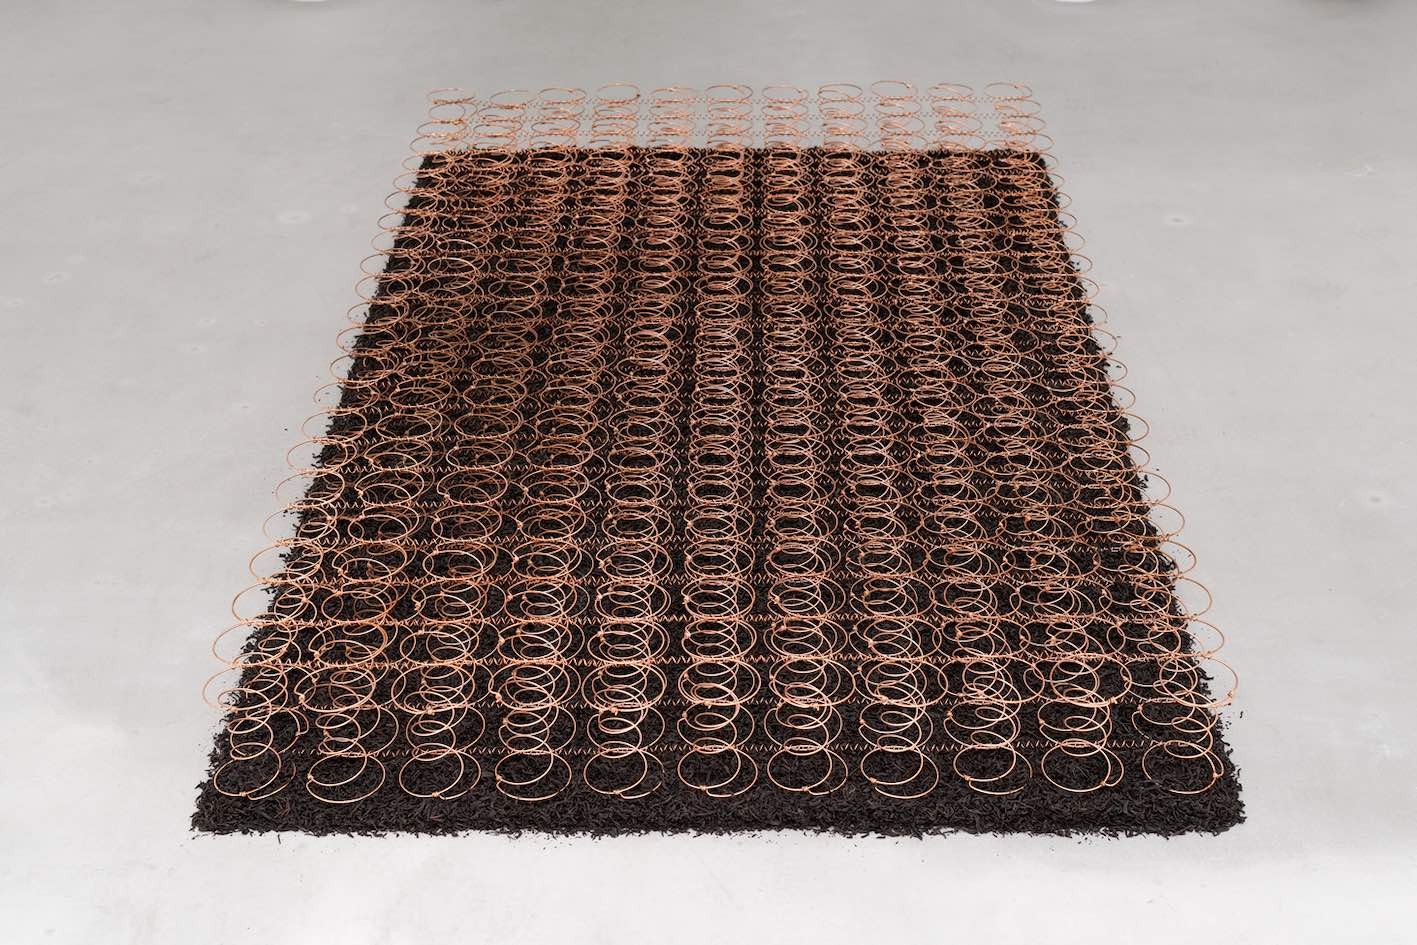 Tranquil, 2020, electroplated copper bed springs, black Ceylan tea, cm. 17 x 194 x 118